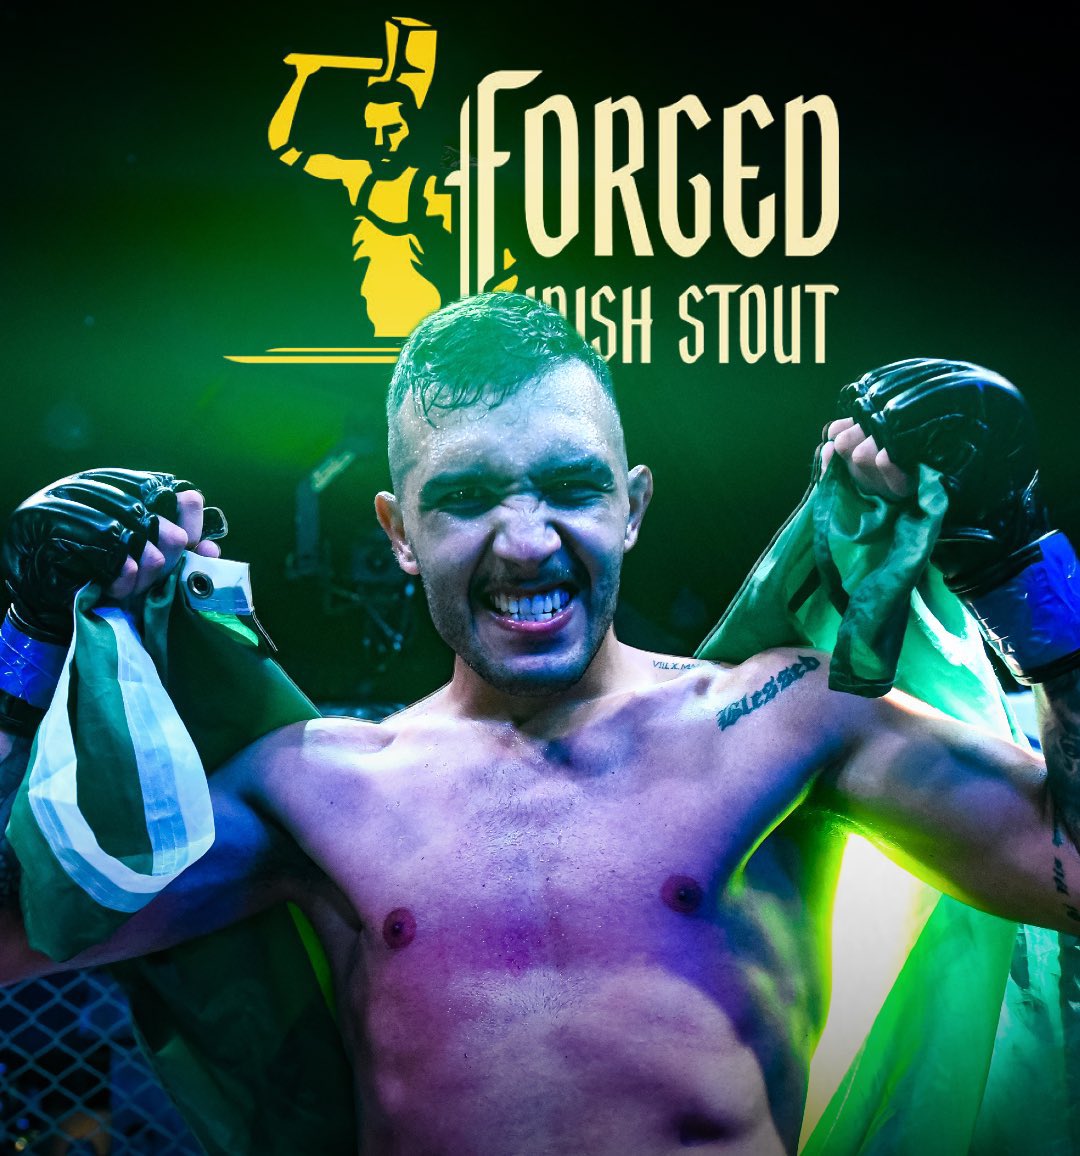 Hey champ @TheNotoriousMMA, when will @ForgedStout have your Brazilian representative? I'm heading into my 18th professional fight on June 13th live on @UFCFightPass. Let's do this together, it would be an honor to be a FRGD Athlete and represent them with a tremendous Win.🇮🇪☘️🇧🇷